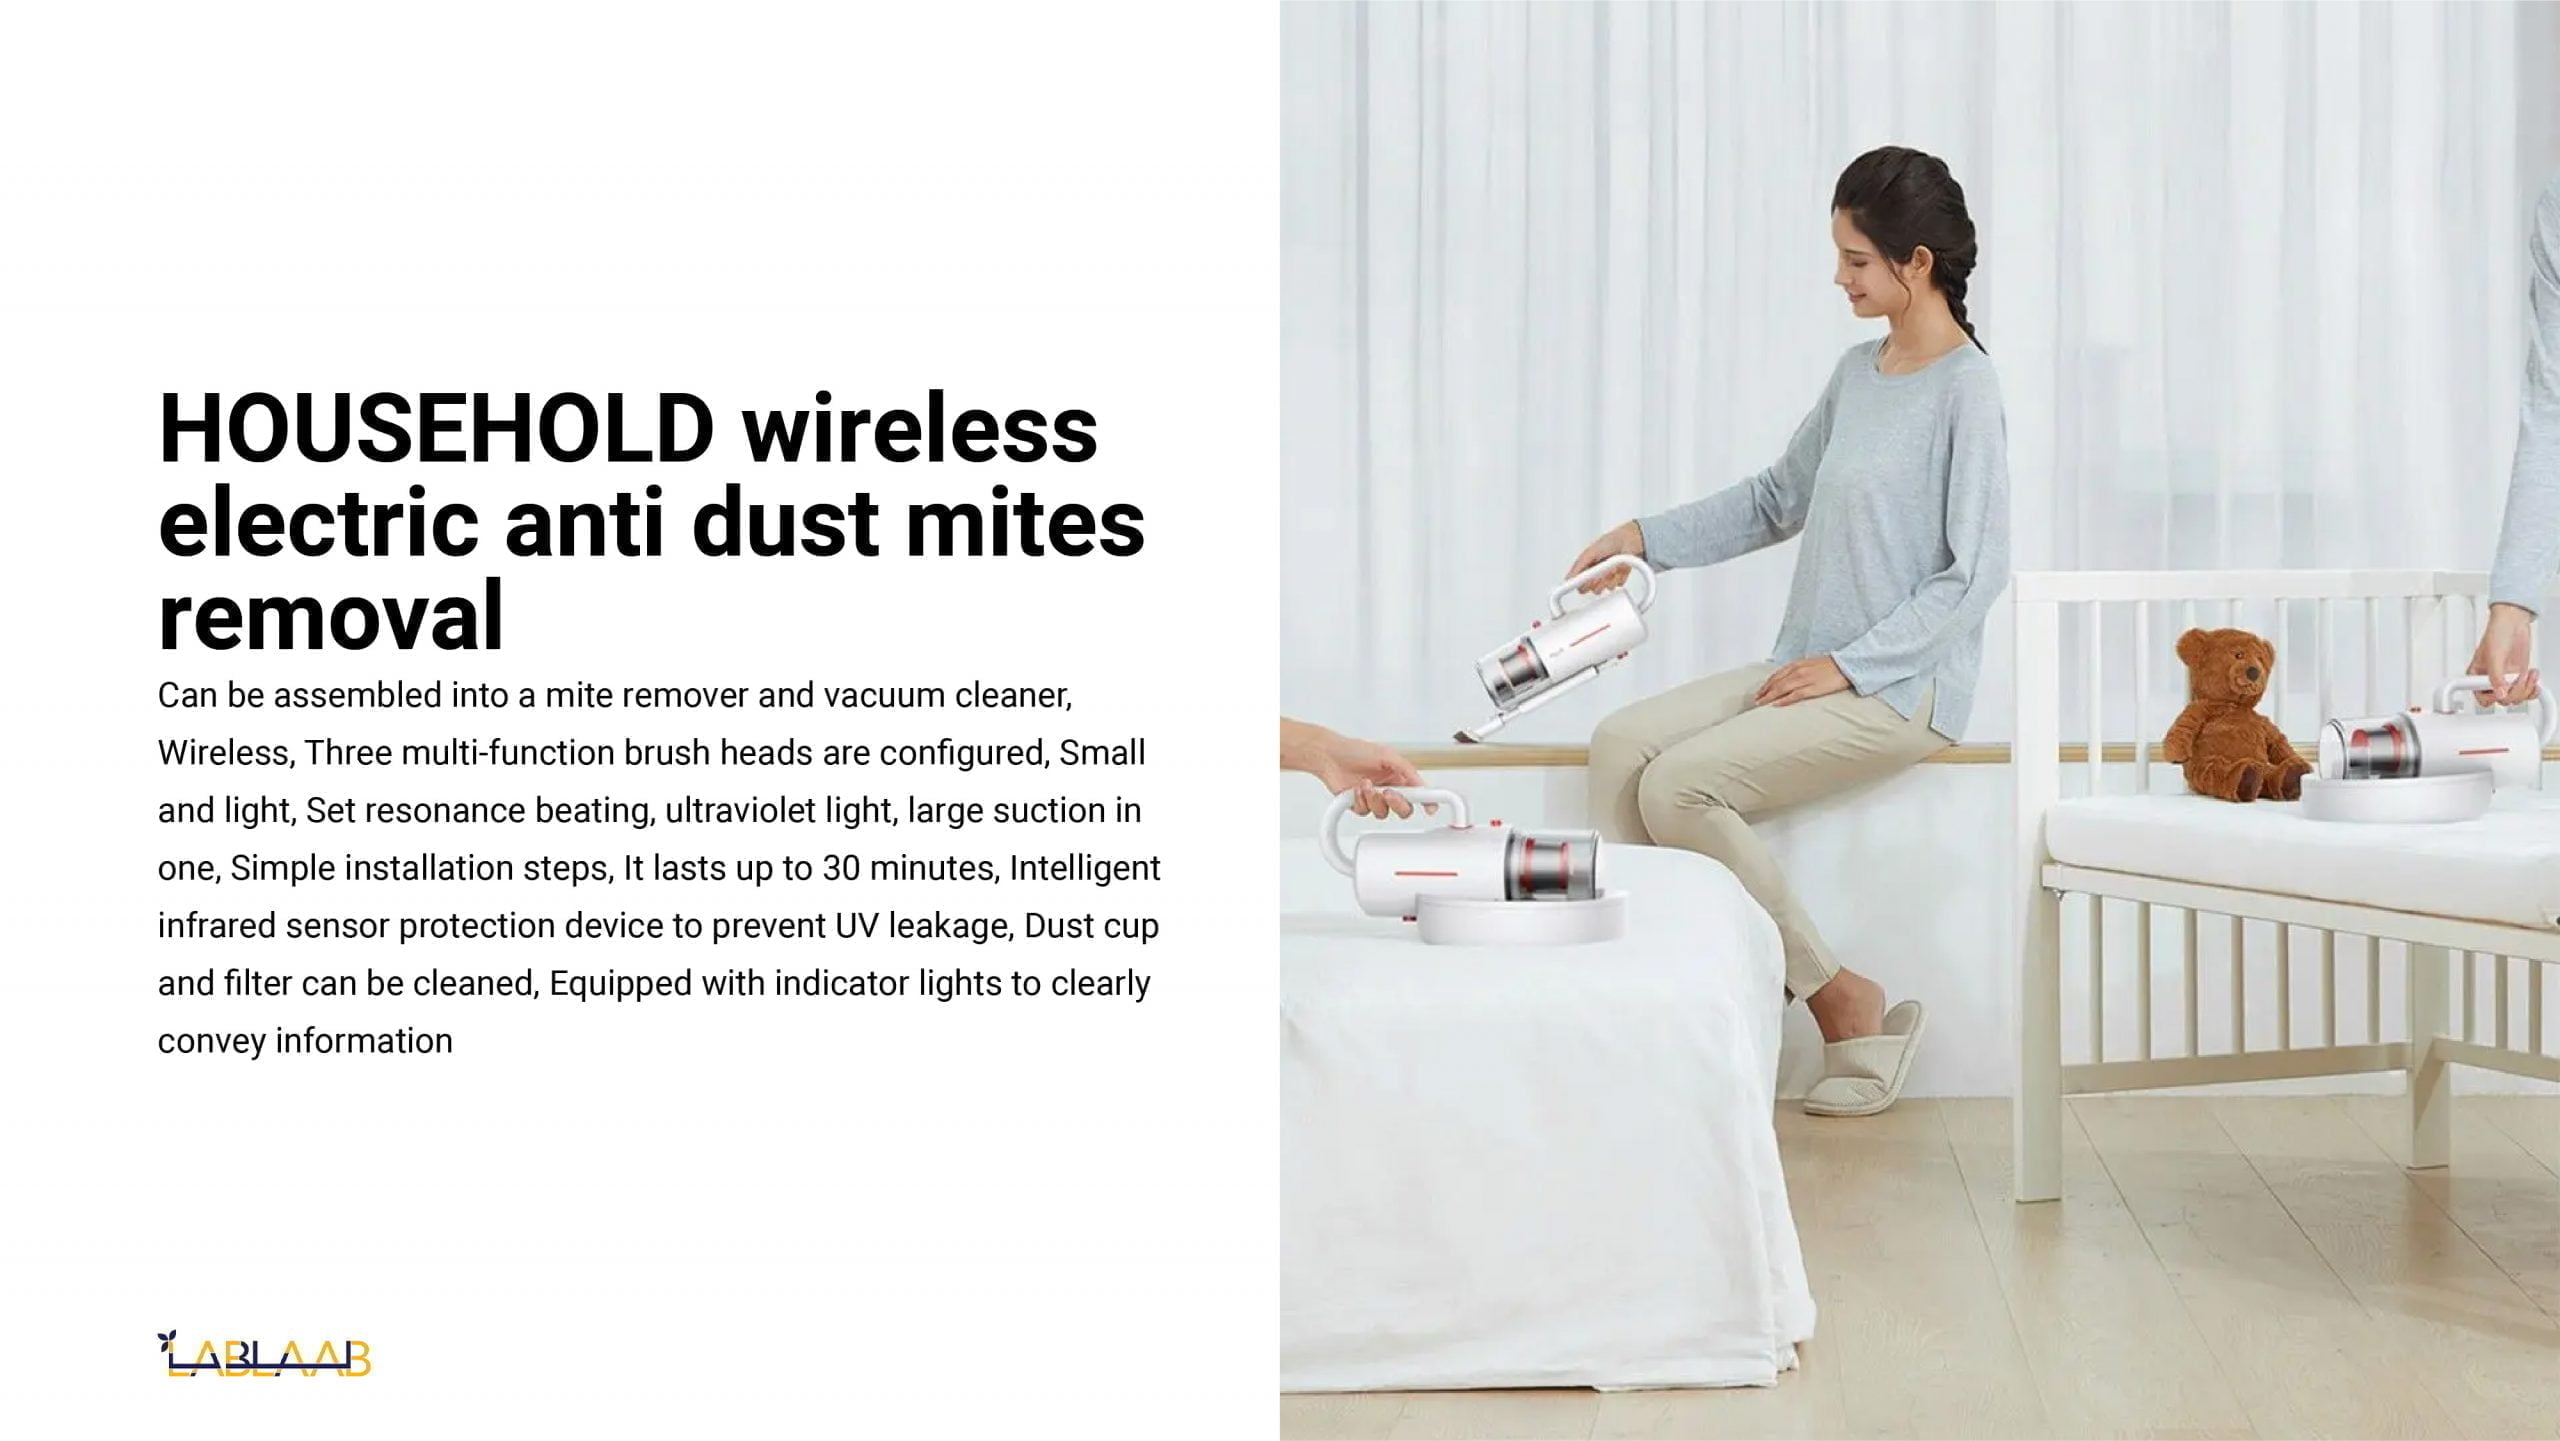 Shoe2E 02 Scaled Xiaomi &Lt;Div Class=&Quot;Goodsintro_Titlebox&Quot;&Gt; &Lt;P Class=&Quot;Goodsintro_Title&Quot;&Gt;Deerma Cm1900 Household Small Wireless Vacuum Cleaner Electric Anti-Dust Mites Remover Instrument&Lt;/P&Gt; &Lt;/Div&Gt; Deerma Deerma Dust Mite Vacuum Cleaner Cm1900